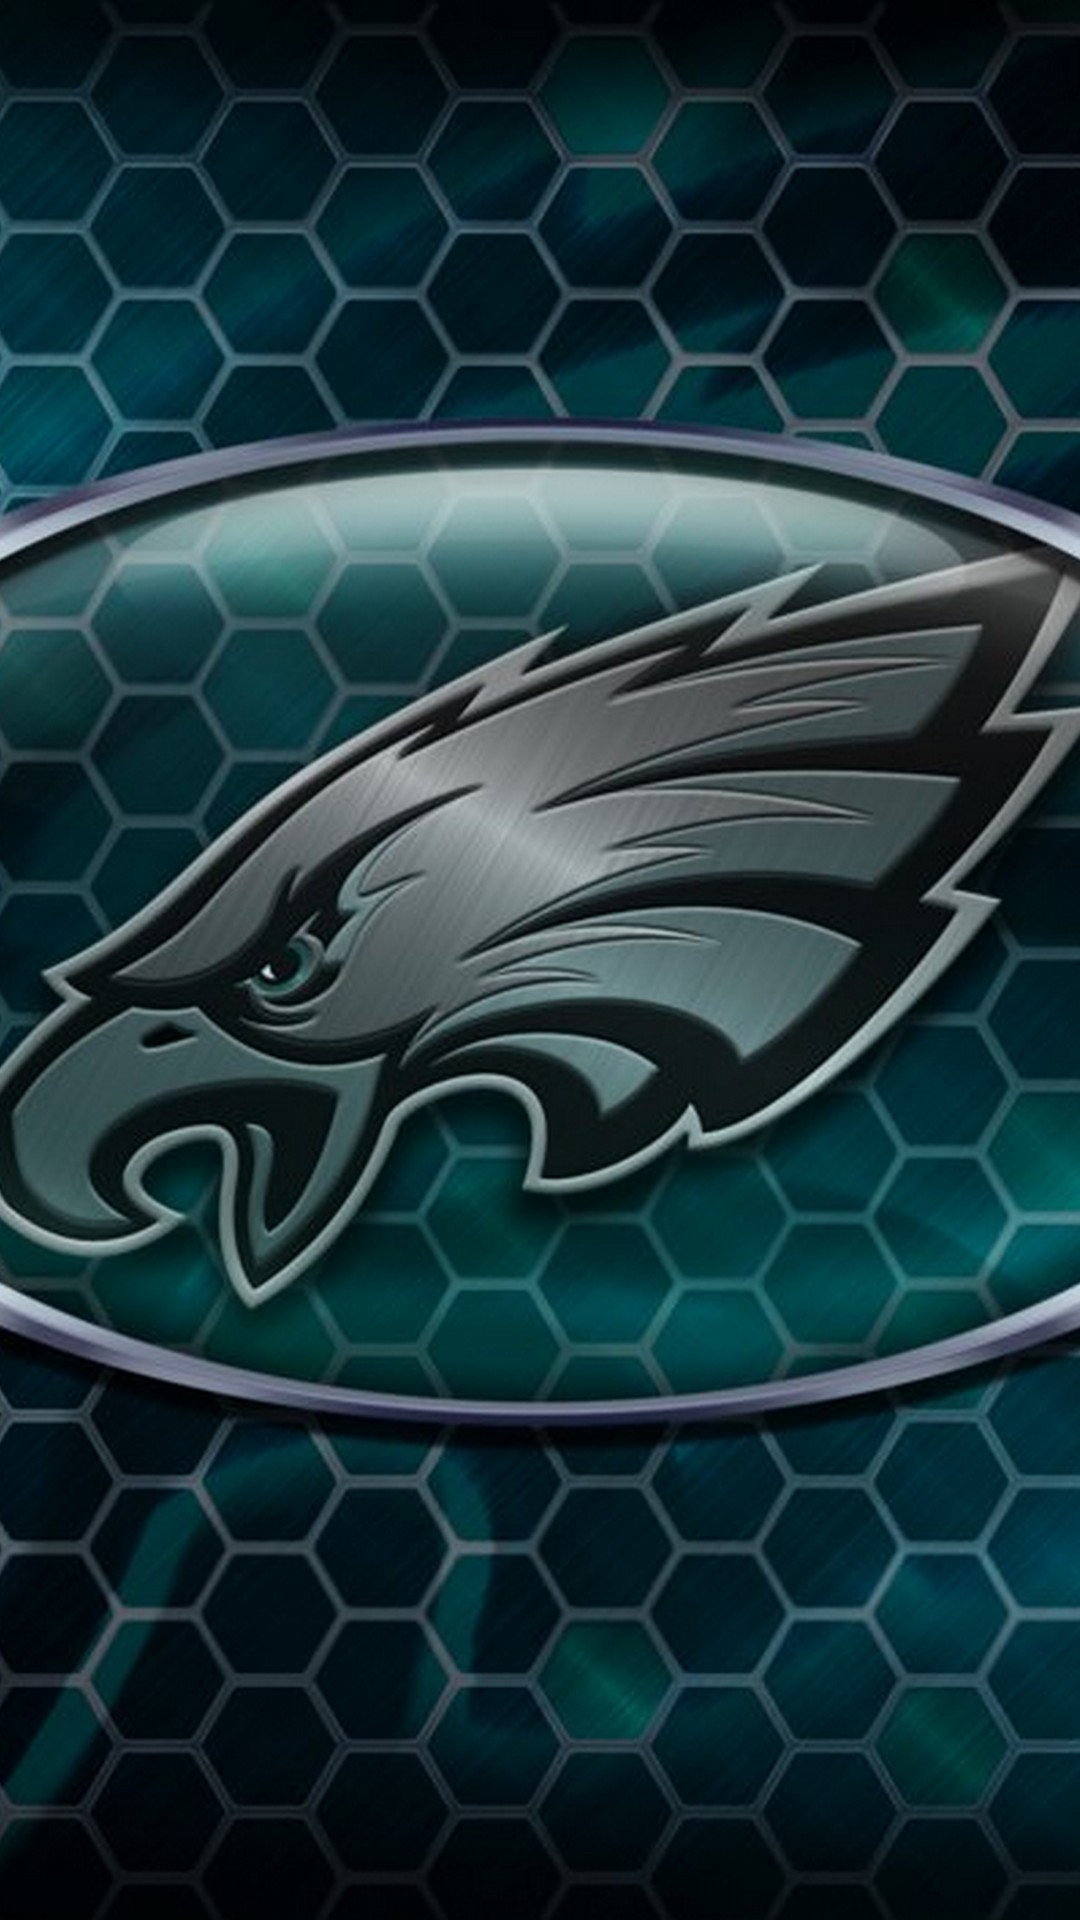 Wallpaper Eagles Football iPhone With Resolution 1080X1920 pixel. You can make this wallpaper for your Mac or Windows Desktop Background, iPhone, Android or Tablet and another Smartphone device for free